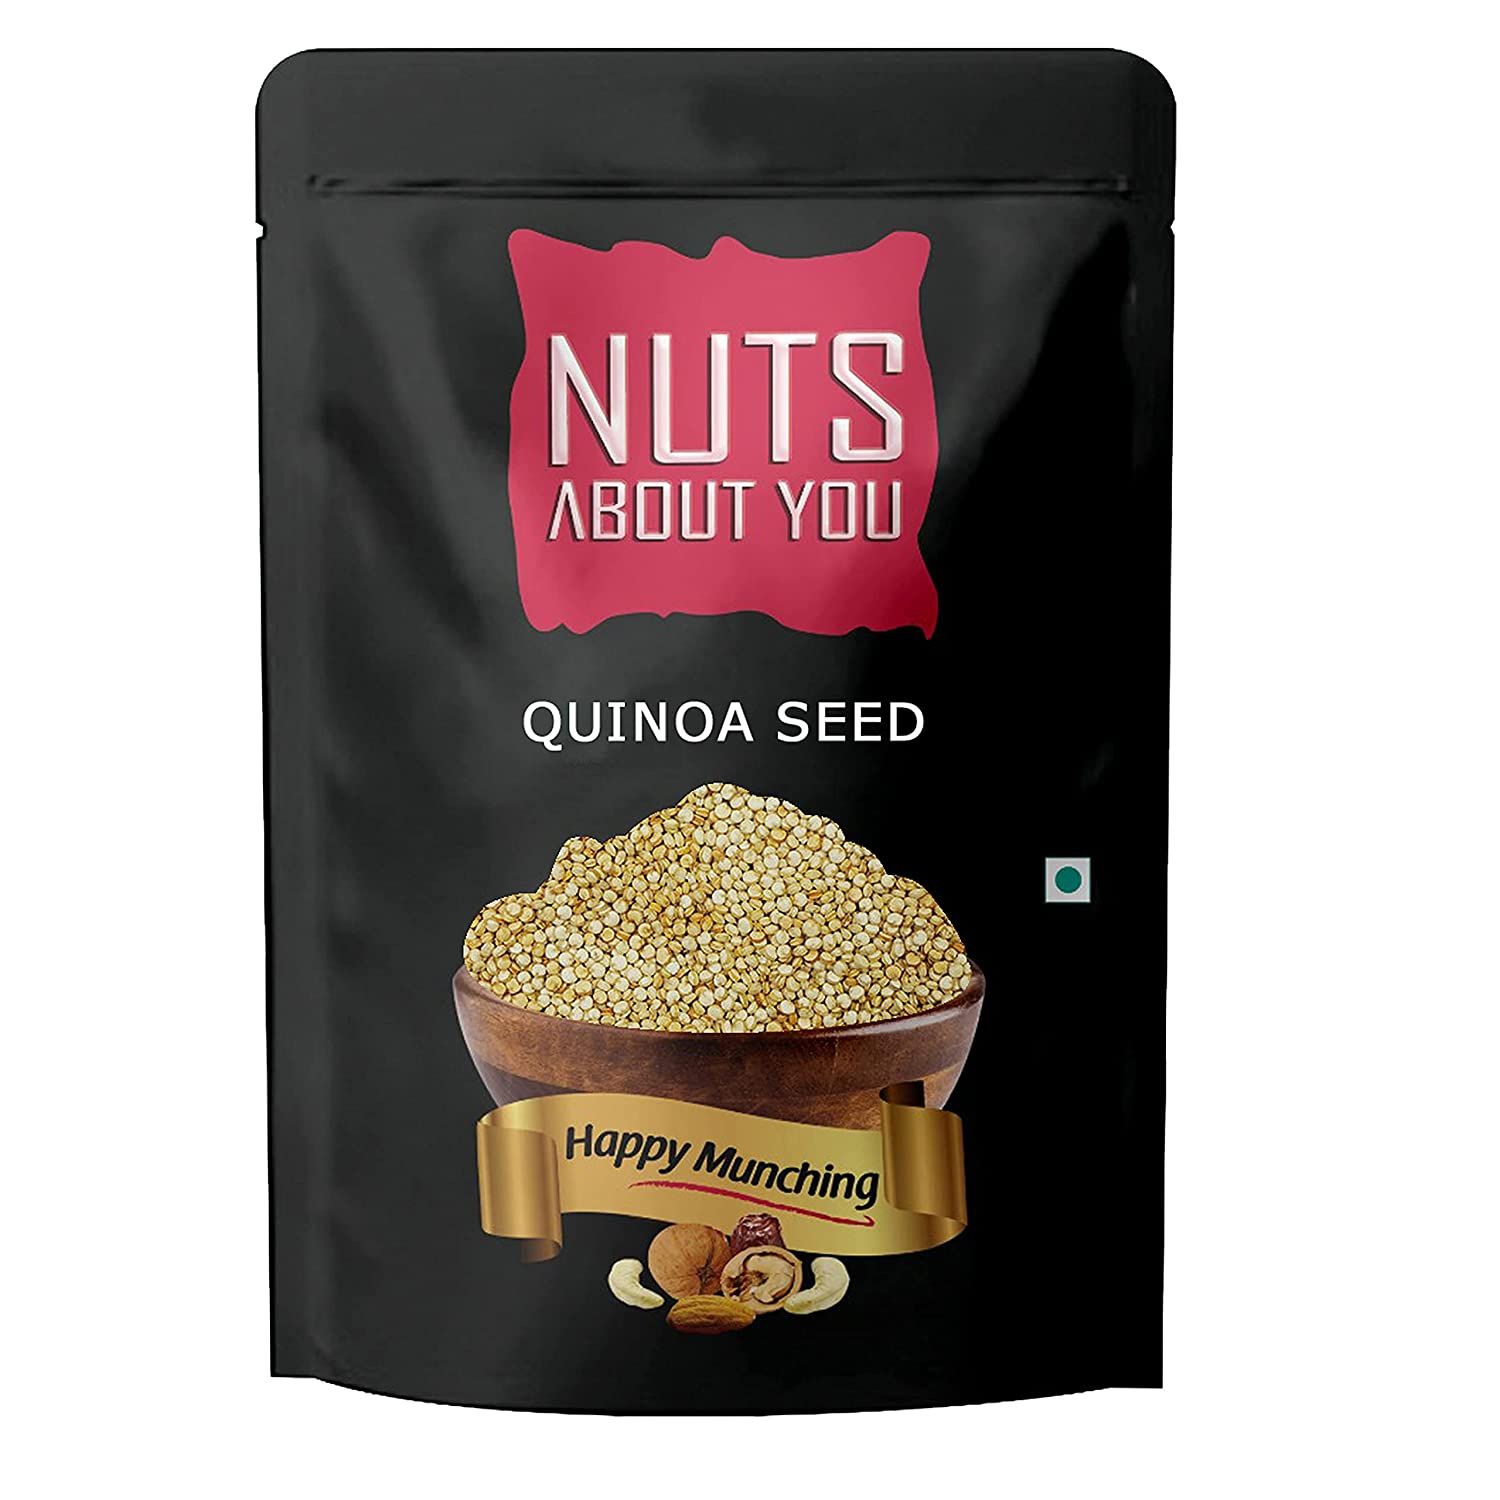 Nuts About You Quinoa Seeds Image